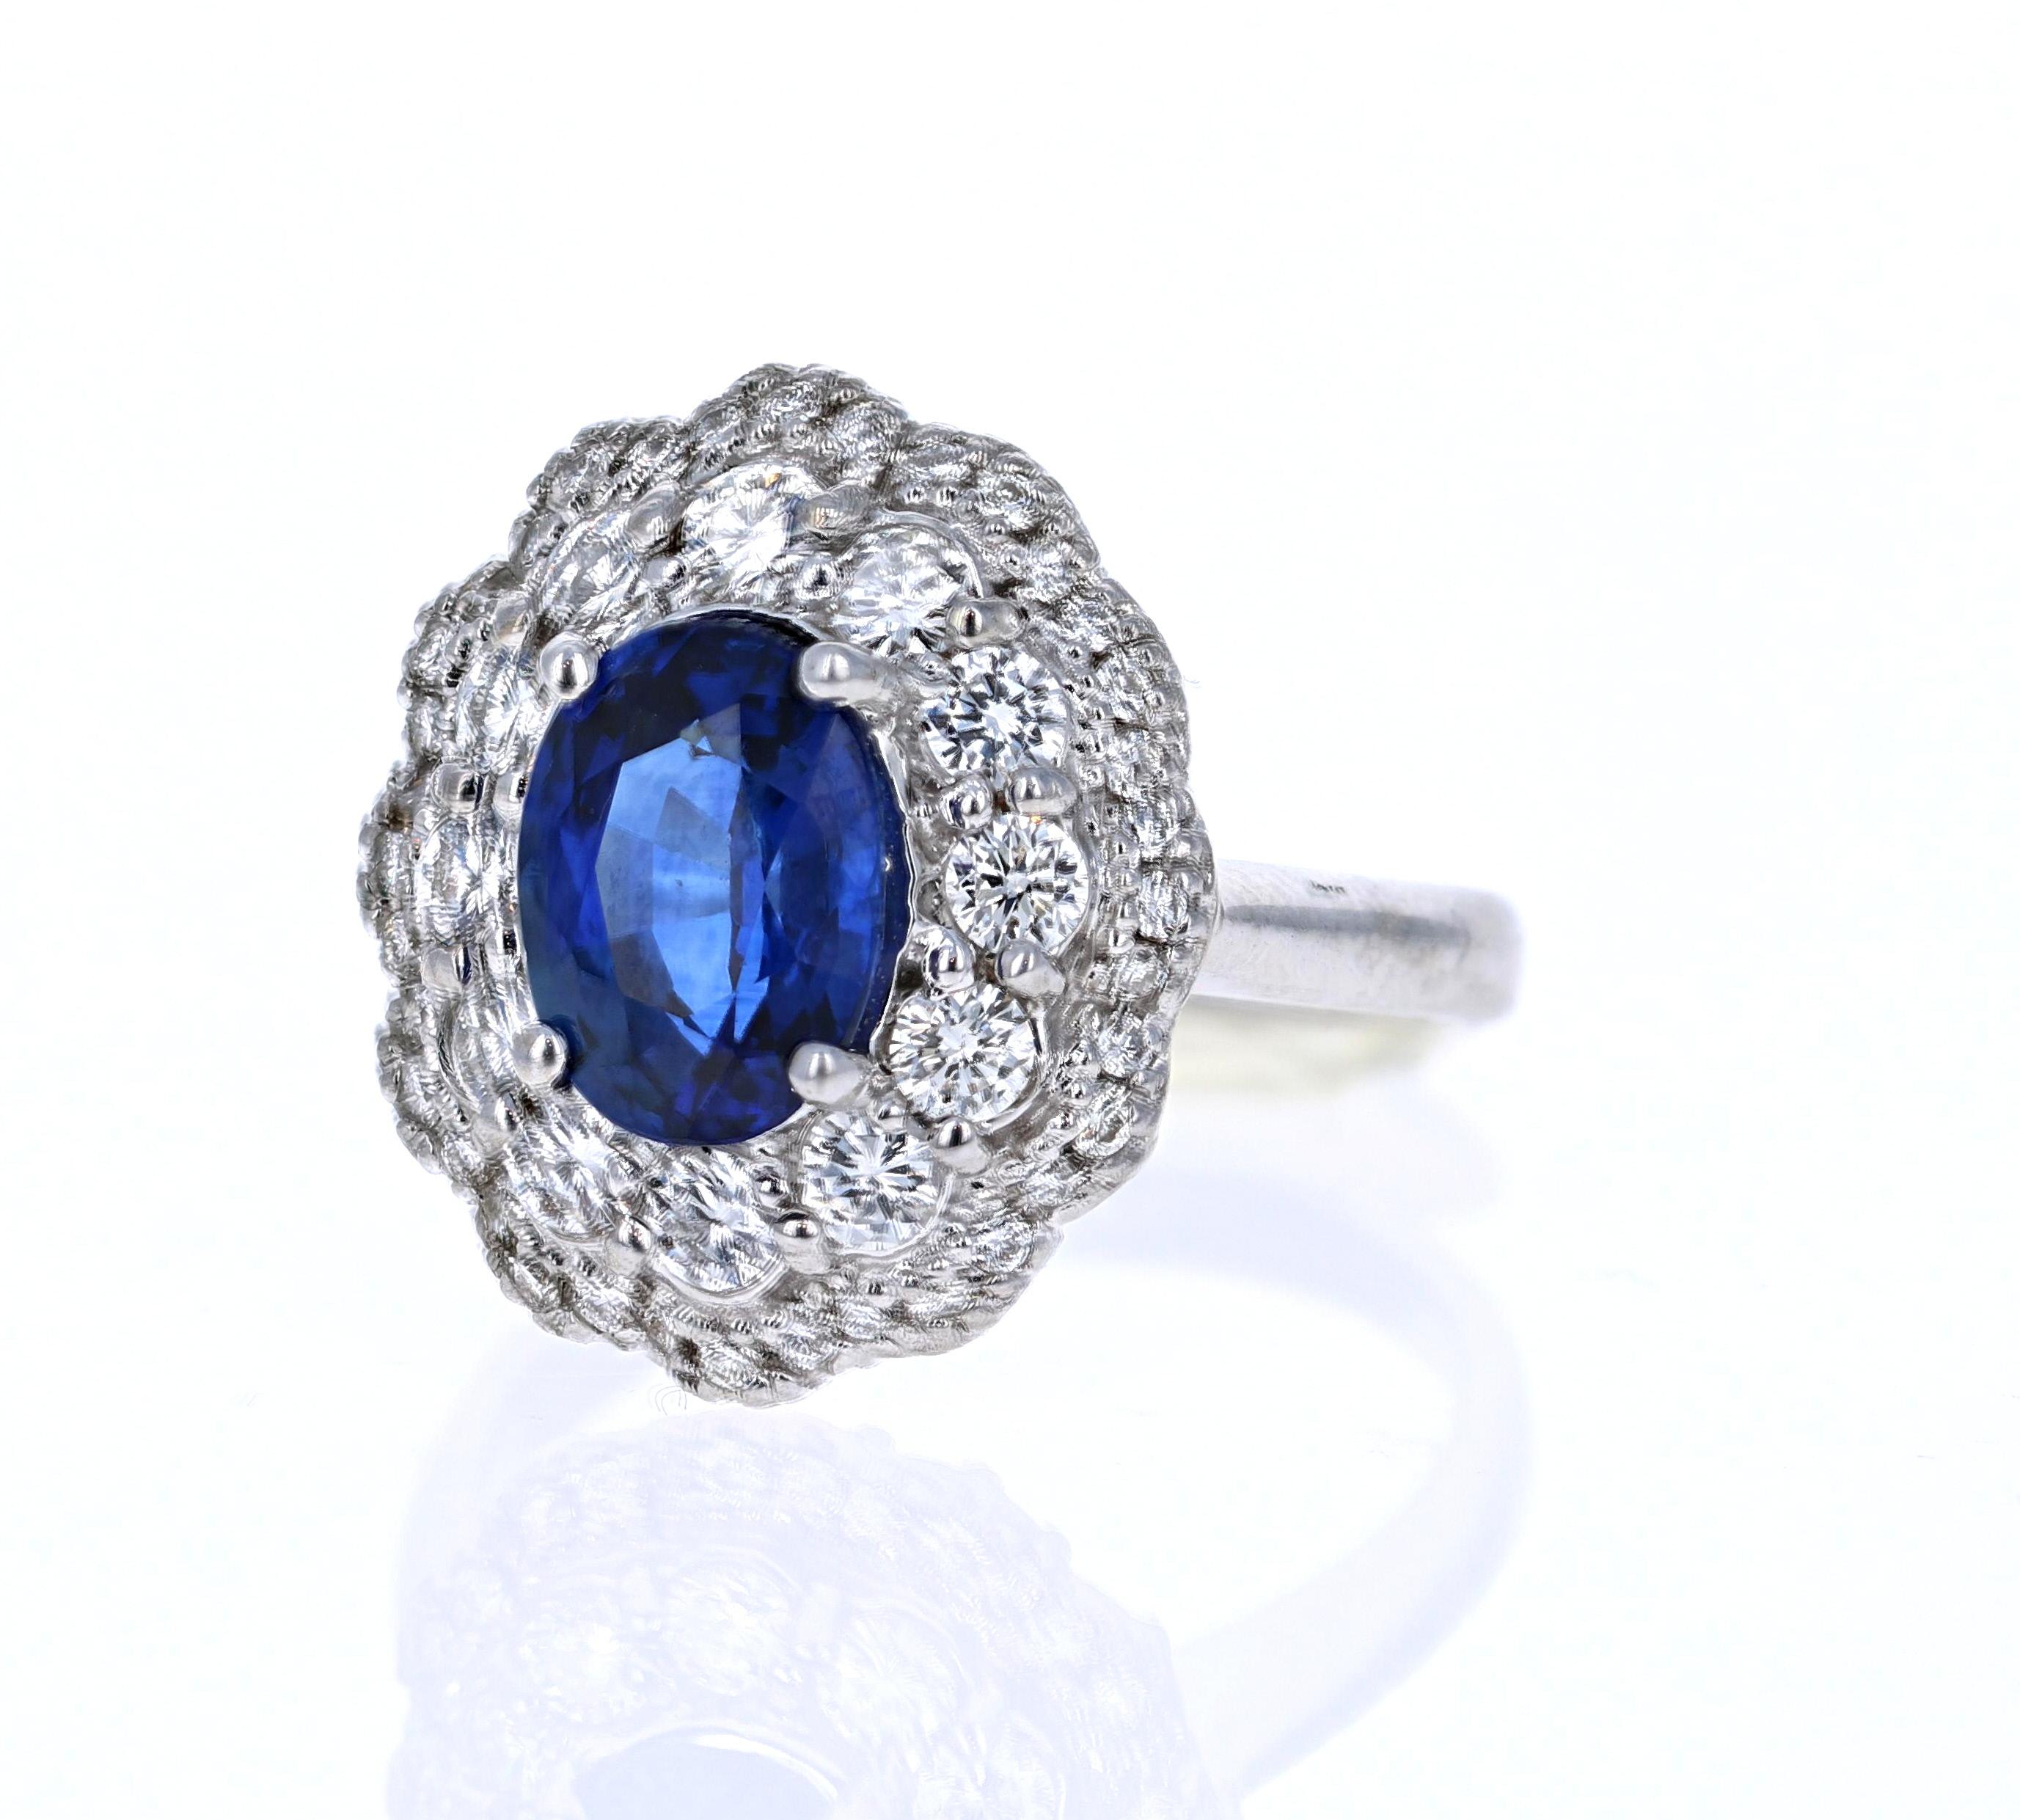 This gorgeous ring has a vivid Oval Cut 2.33 Carat Blue Sapphire and is surrounded by a cluster of 46 Round Cut Diamonds that weigh 1.20 Carats. The total carat weight of the ring is 3.53 Carats. The Sapphire is Heated and is GIA Certified with